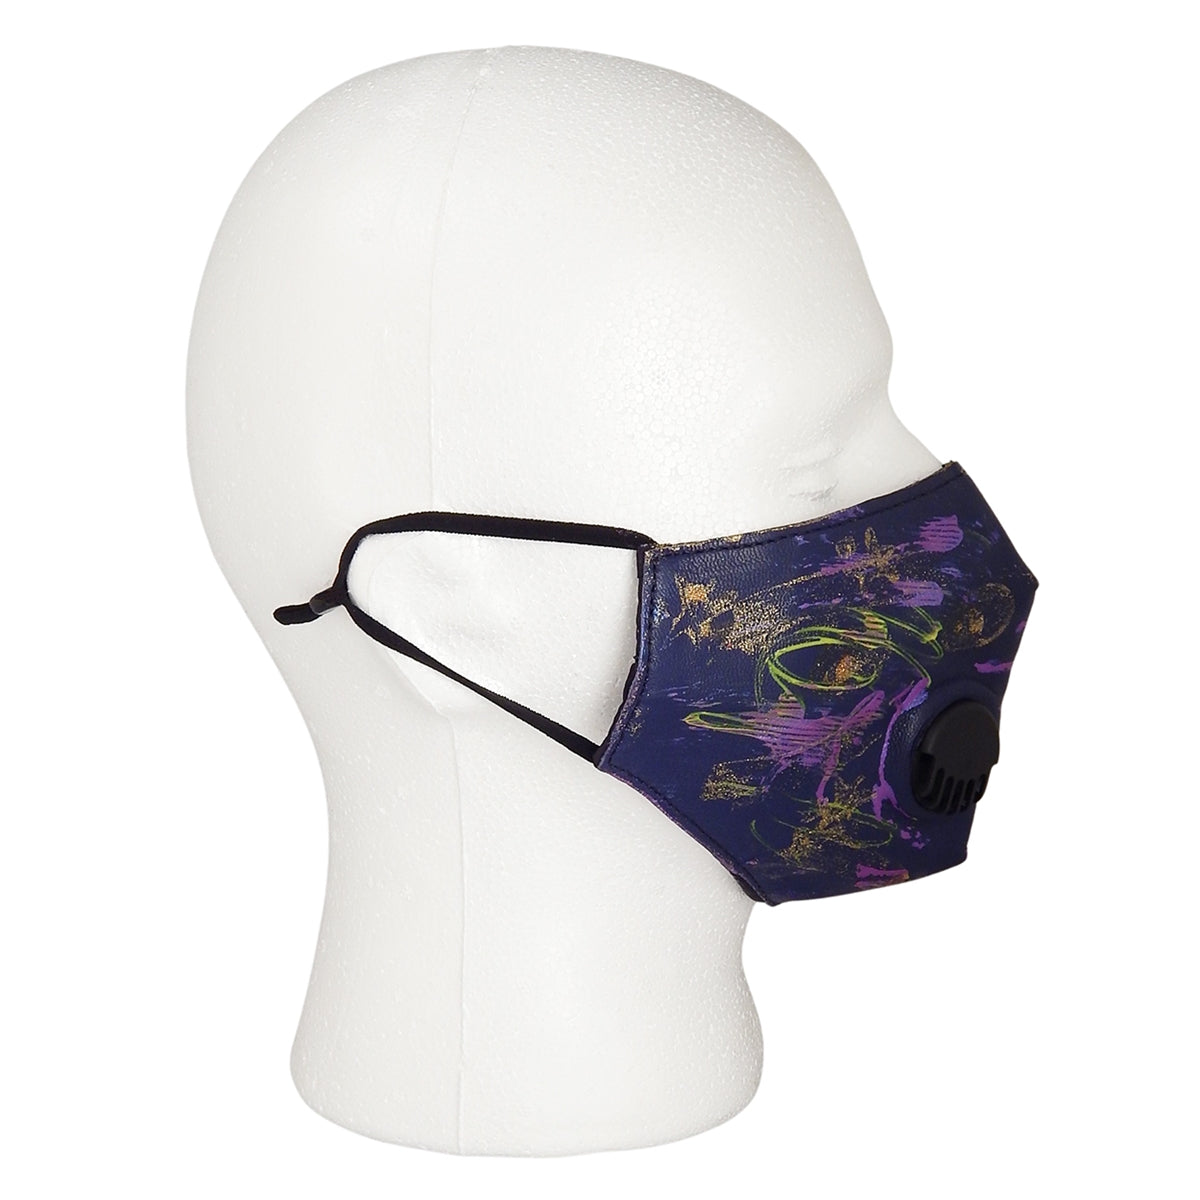 Anton - ABSTRACT LEATHER COVID MASK in Navy